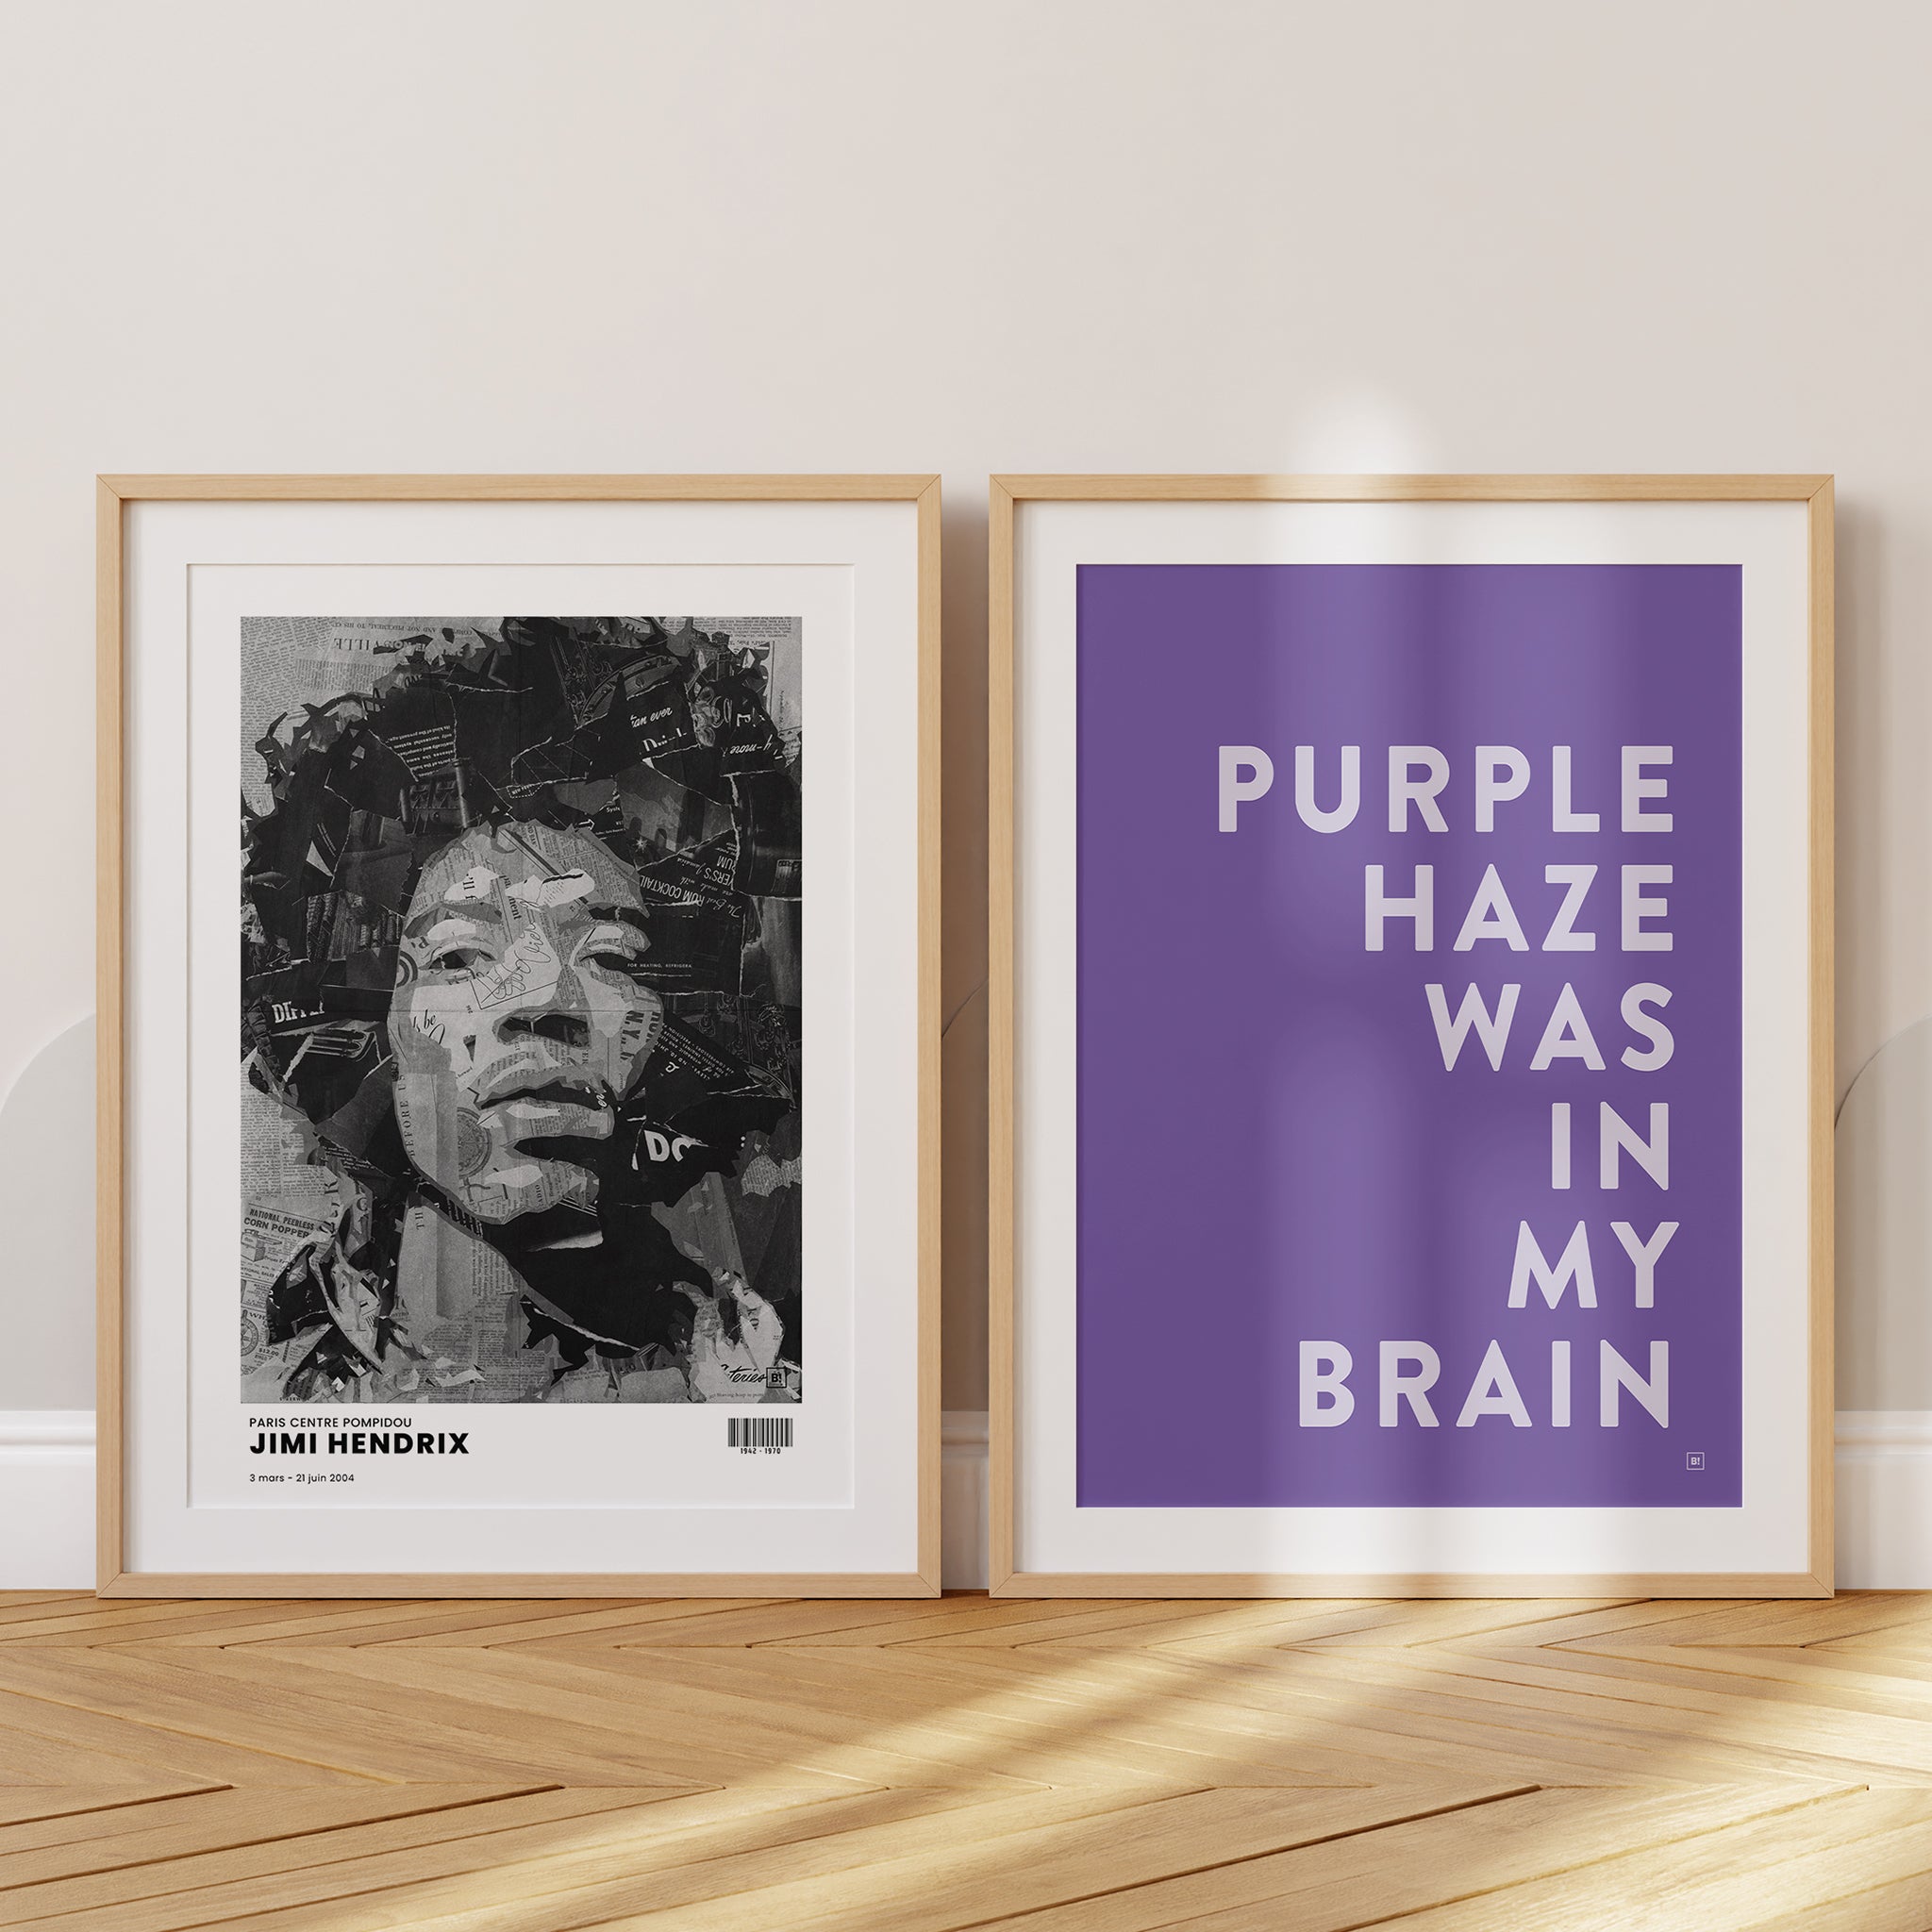 Be inspired by our Jimi Hendrix "Purple Haze Was In My Brain" lyric art print! This artwork has been printed using the giclée process on archival acid-free paper and is presented in a set of two oak frames with passe-partout that perfectly captures its timeless beauty in every detail.